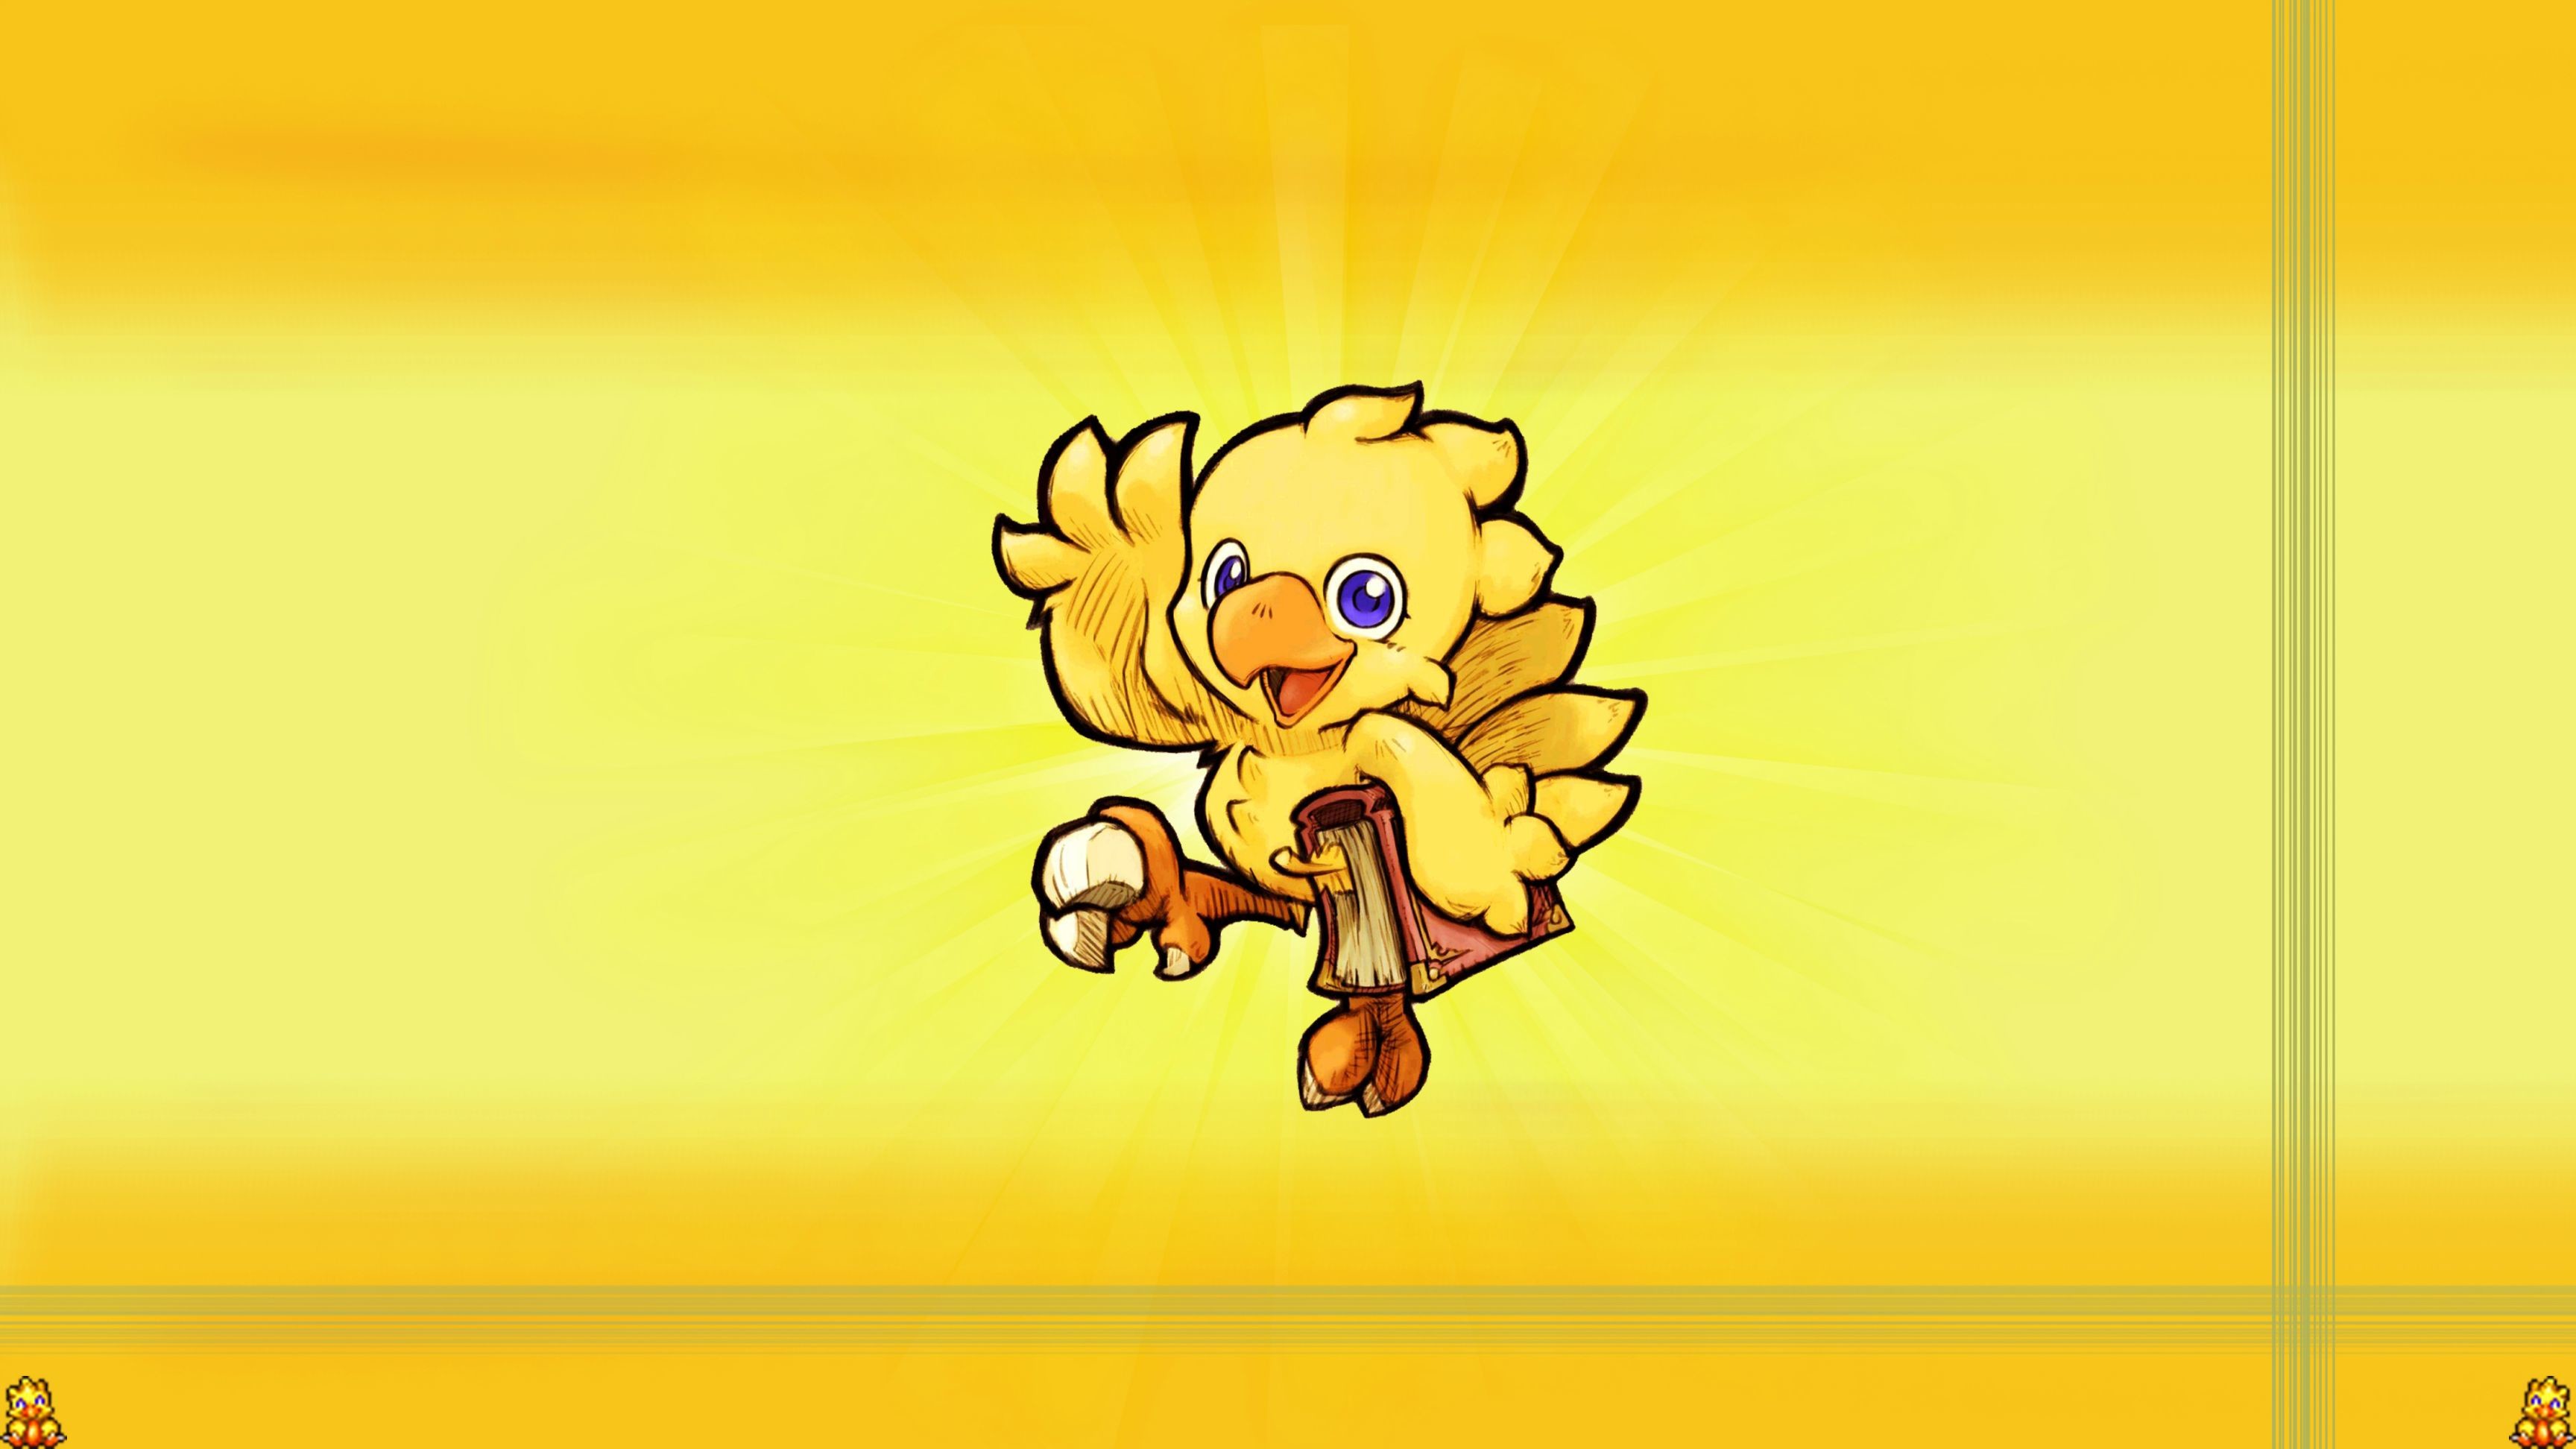 3456x1944 Threw together a quick chocobo wallpaper, hope you guys like it!